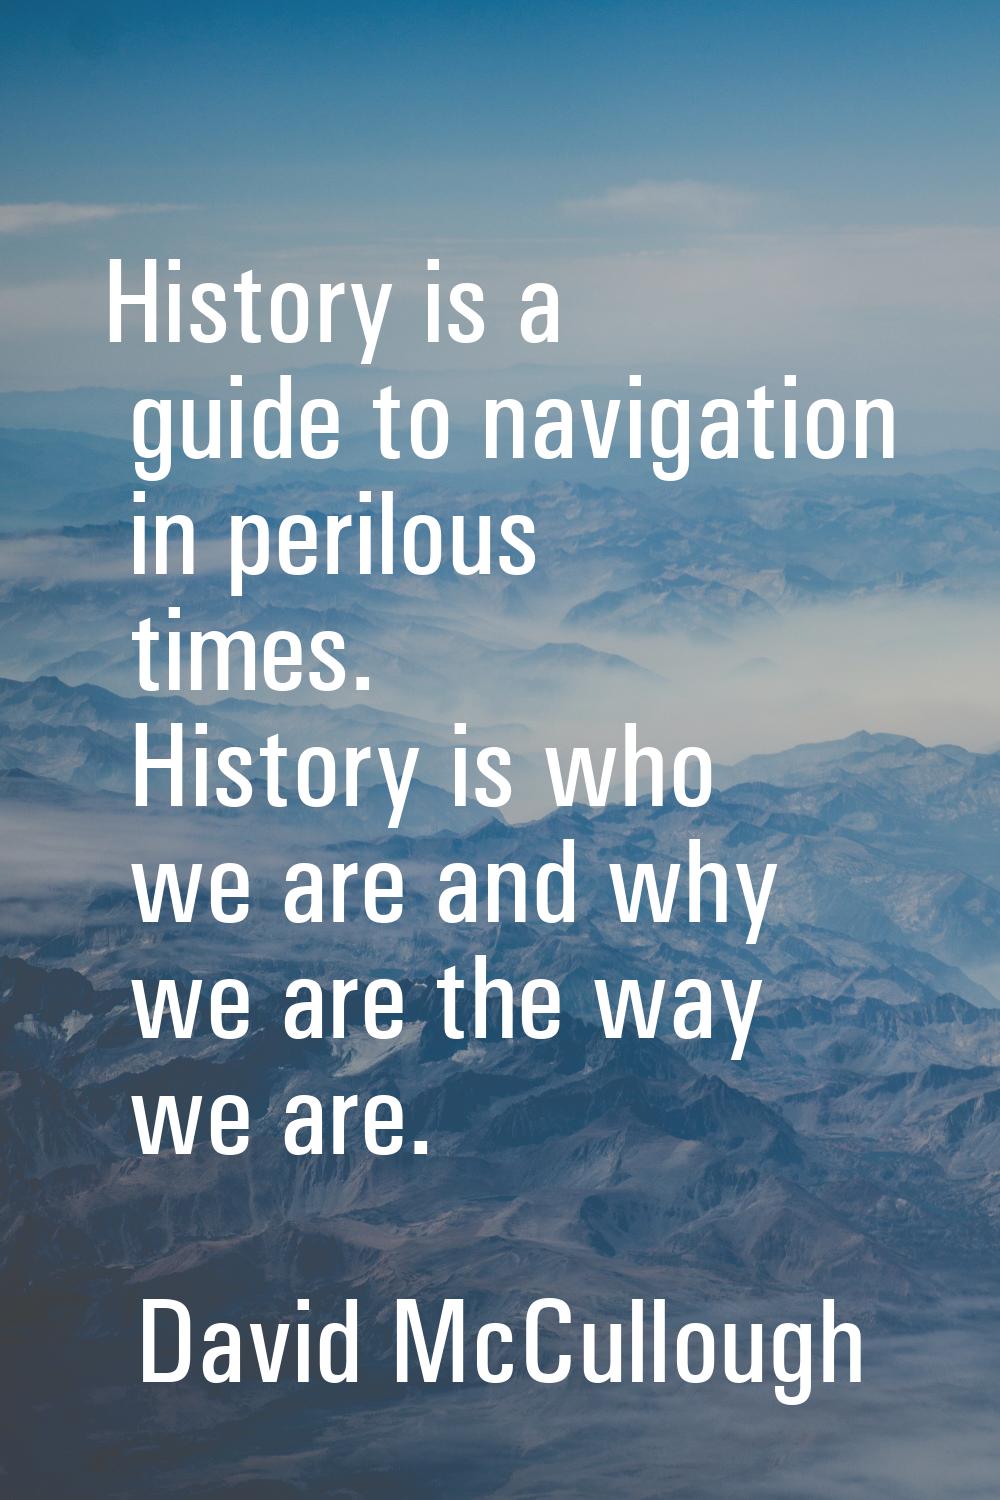 History is a guide to navigation in perilous times. History is who we are and why we are the way we